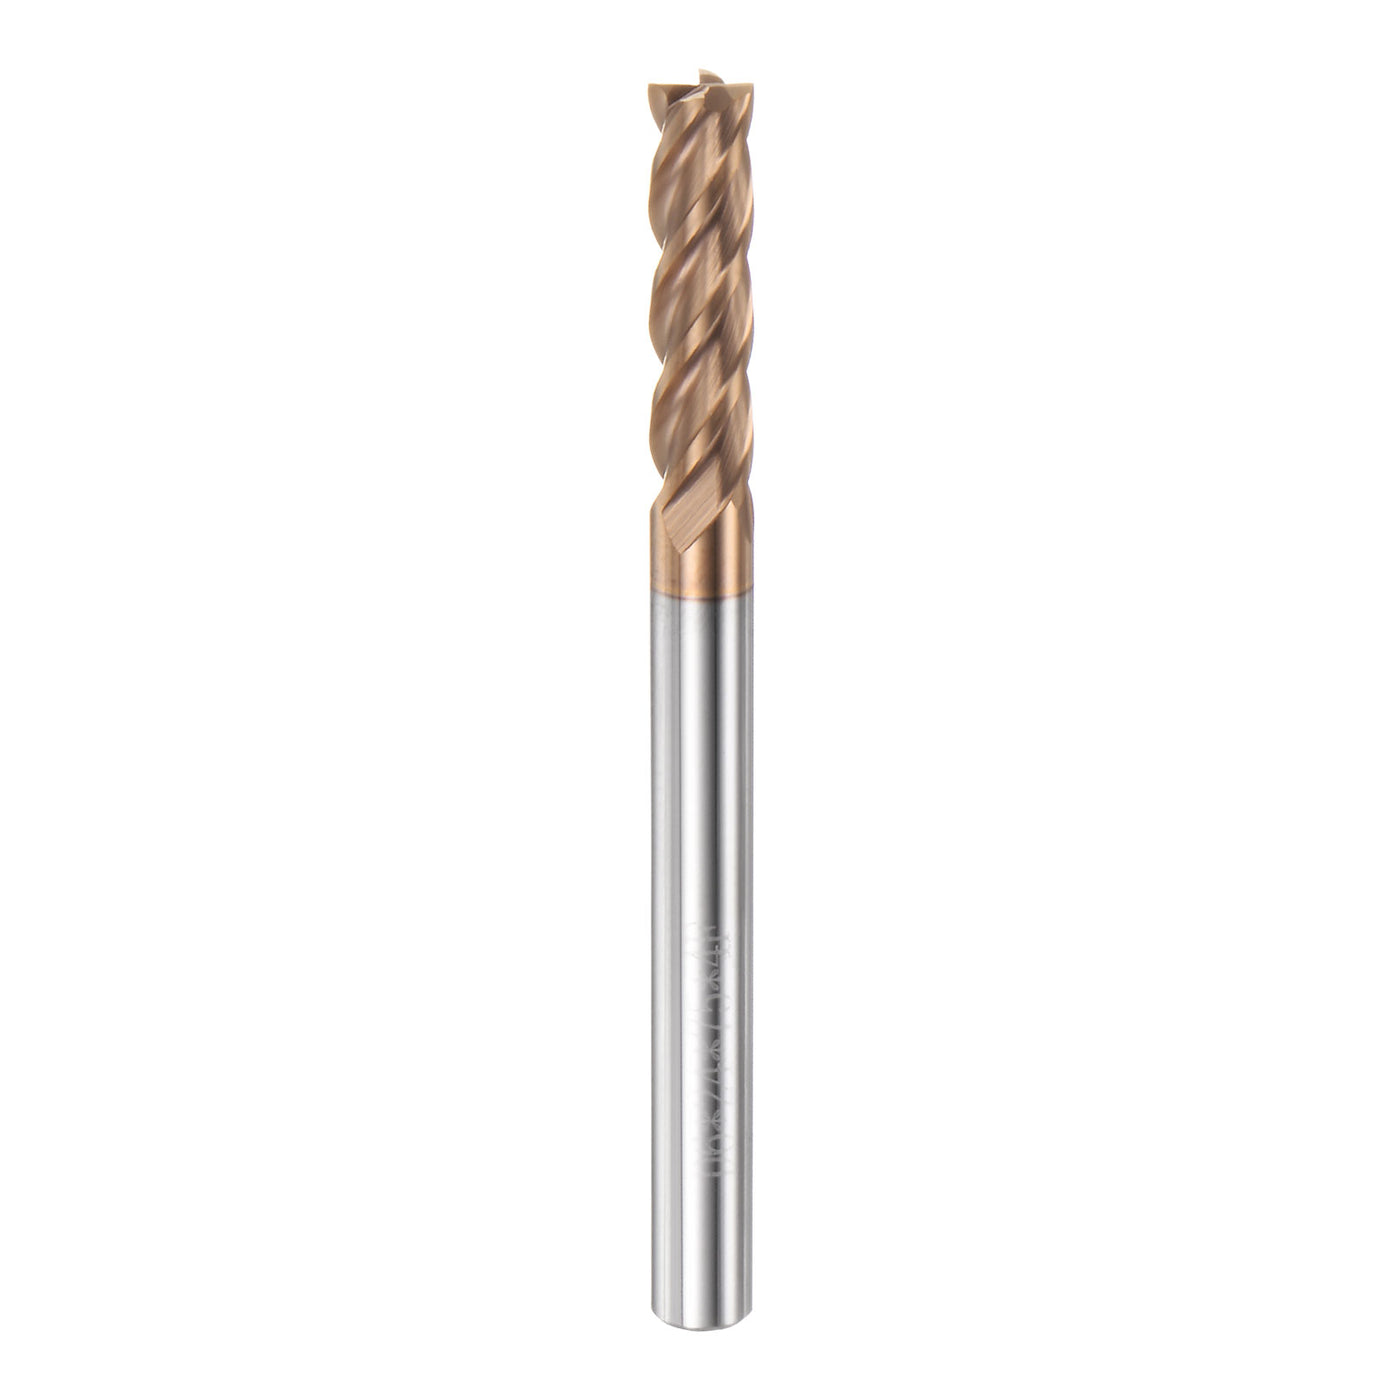 Harfington 6mm x 24mm x 6mm x 75mm AlTiN Coated Carbide 4 Flutes Square End Mill Cutter